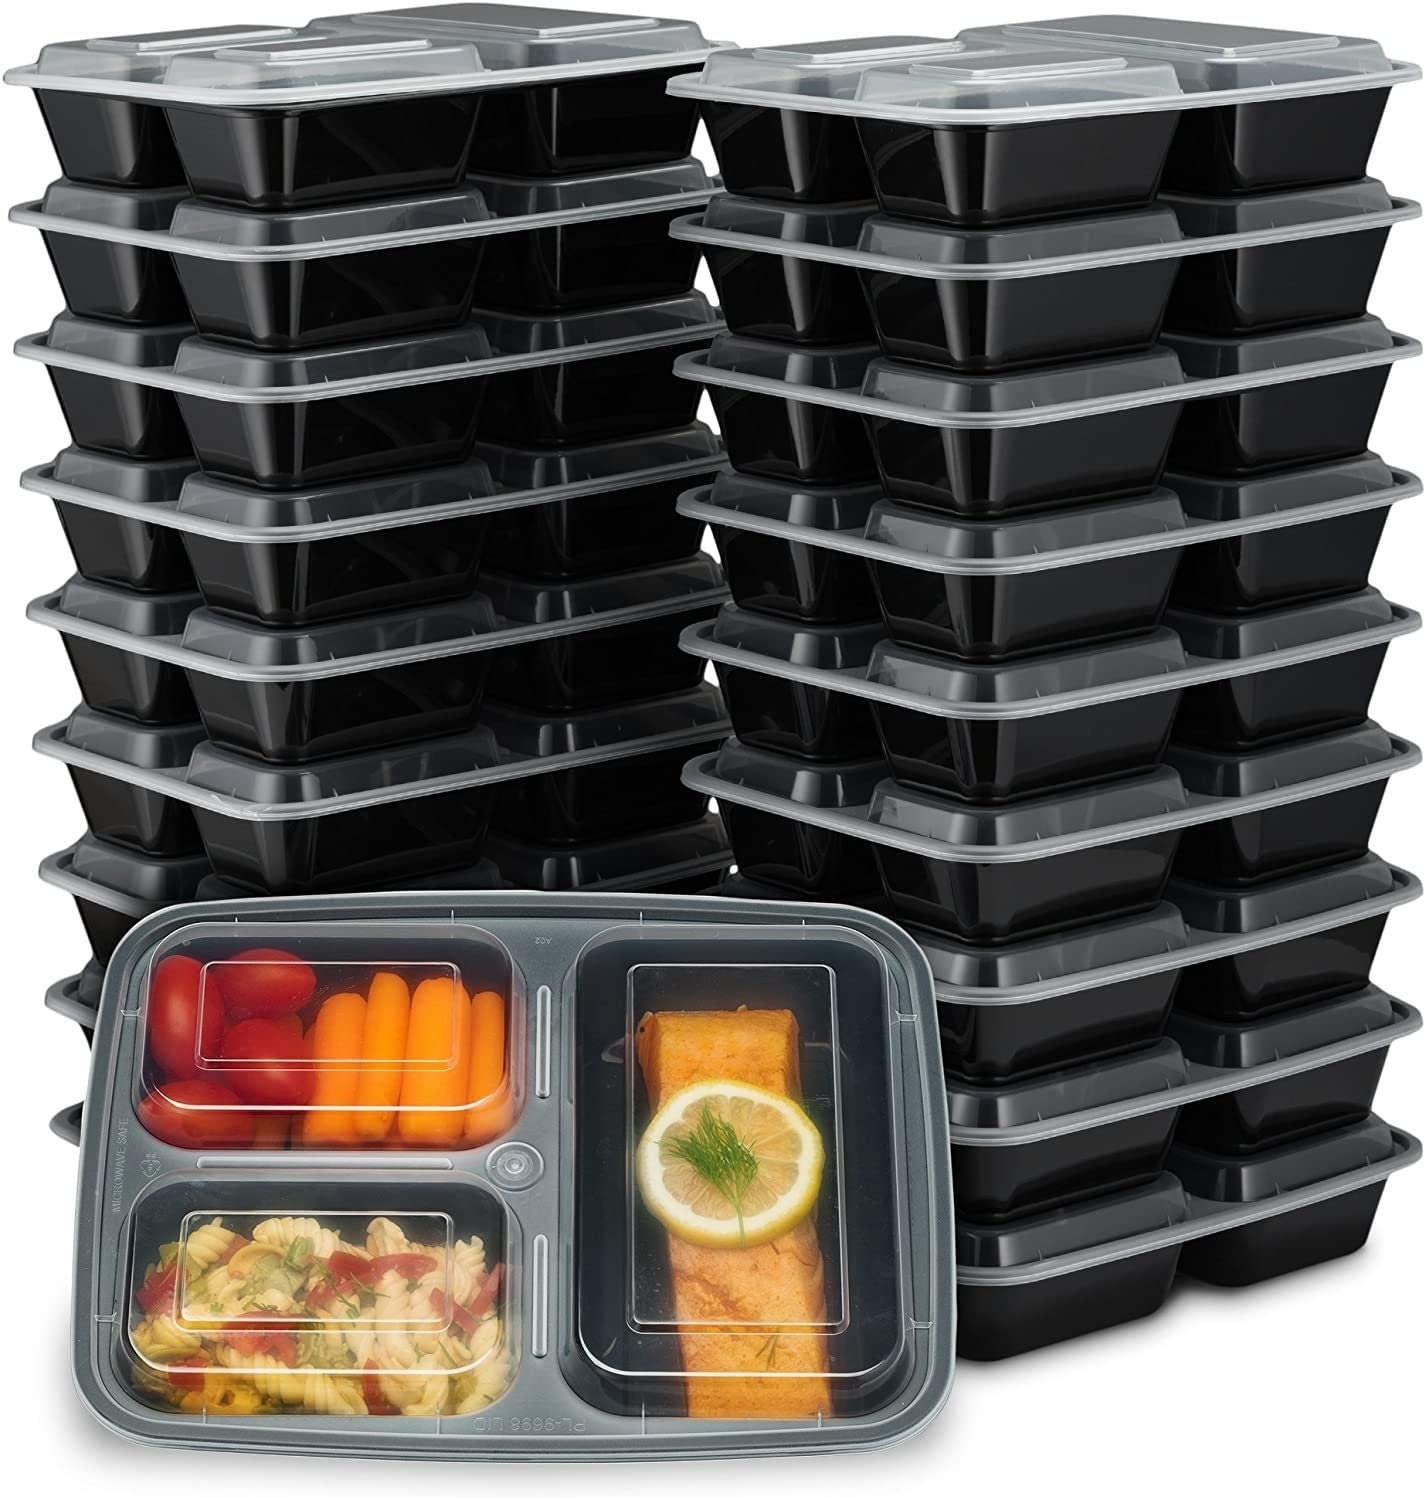 Meal Prep Trays, 40-Pack for just $19.99 shipped!